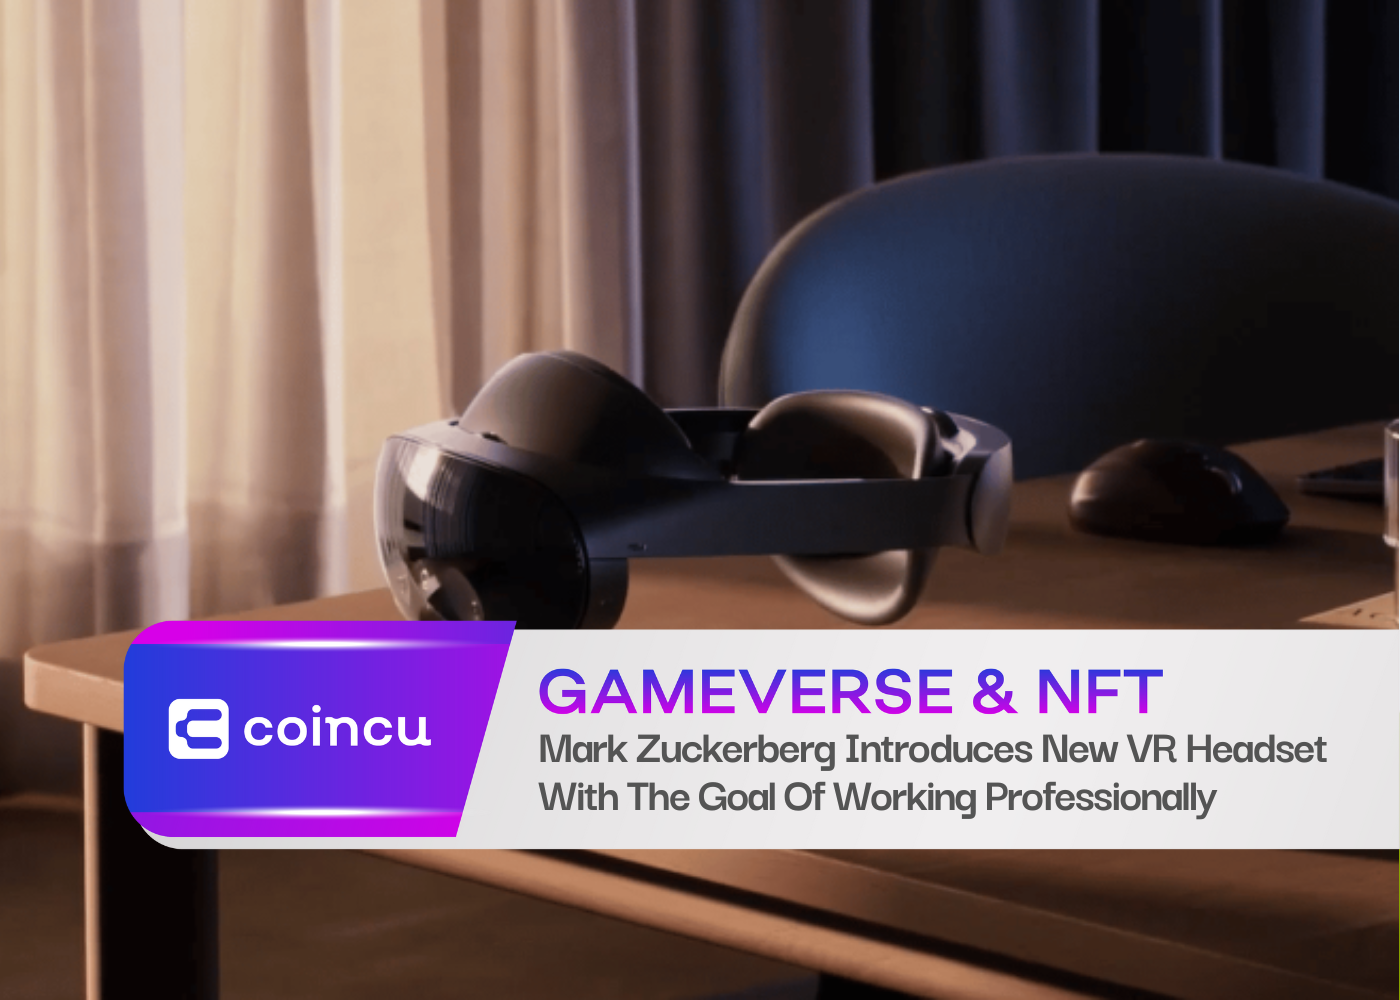 Mark Zuckerberg Introduces New VR Headset With The Goal Of Working Professionally